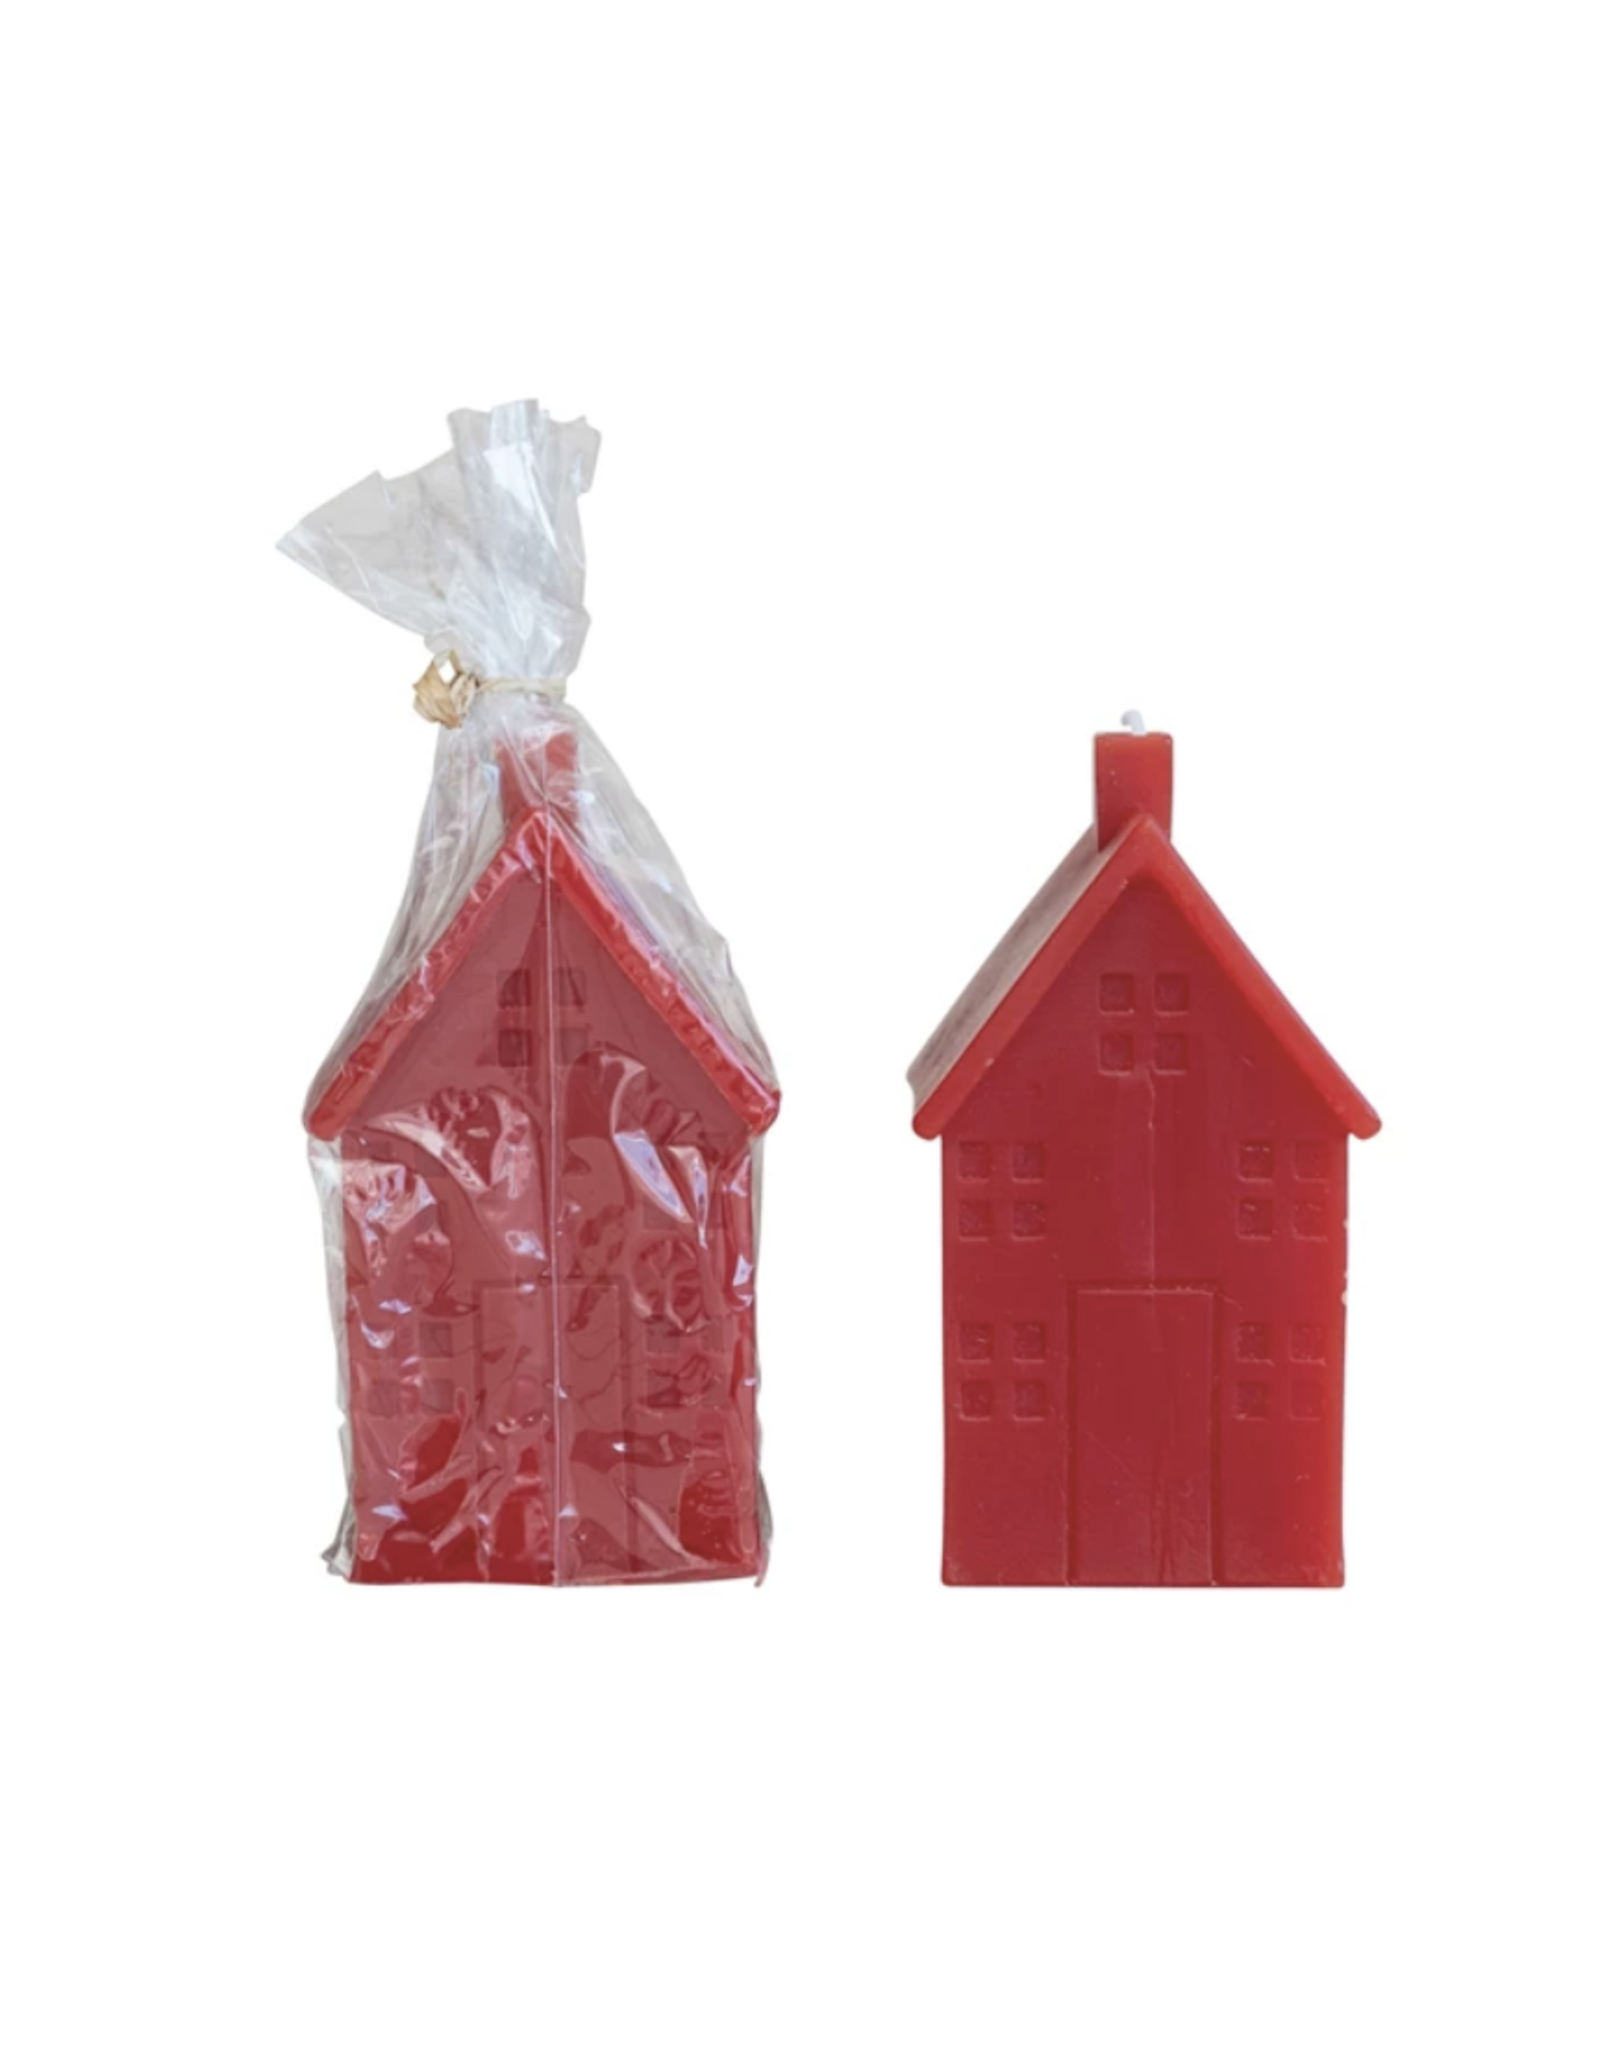 Unscented Red House Candle - Large